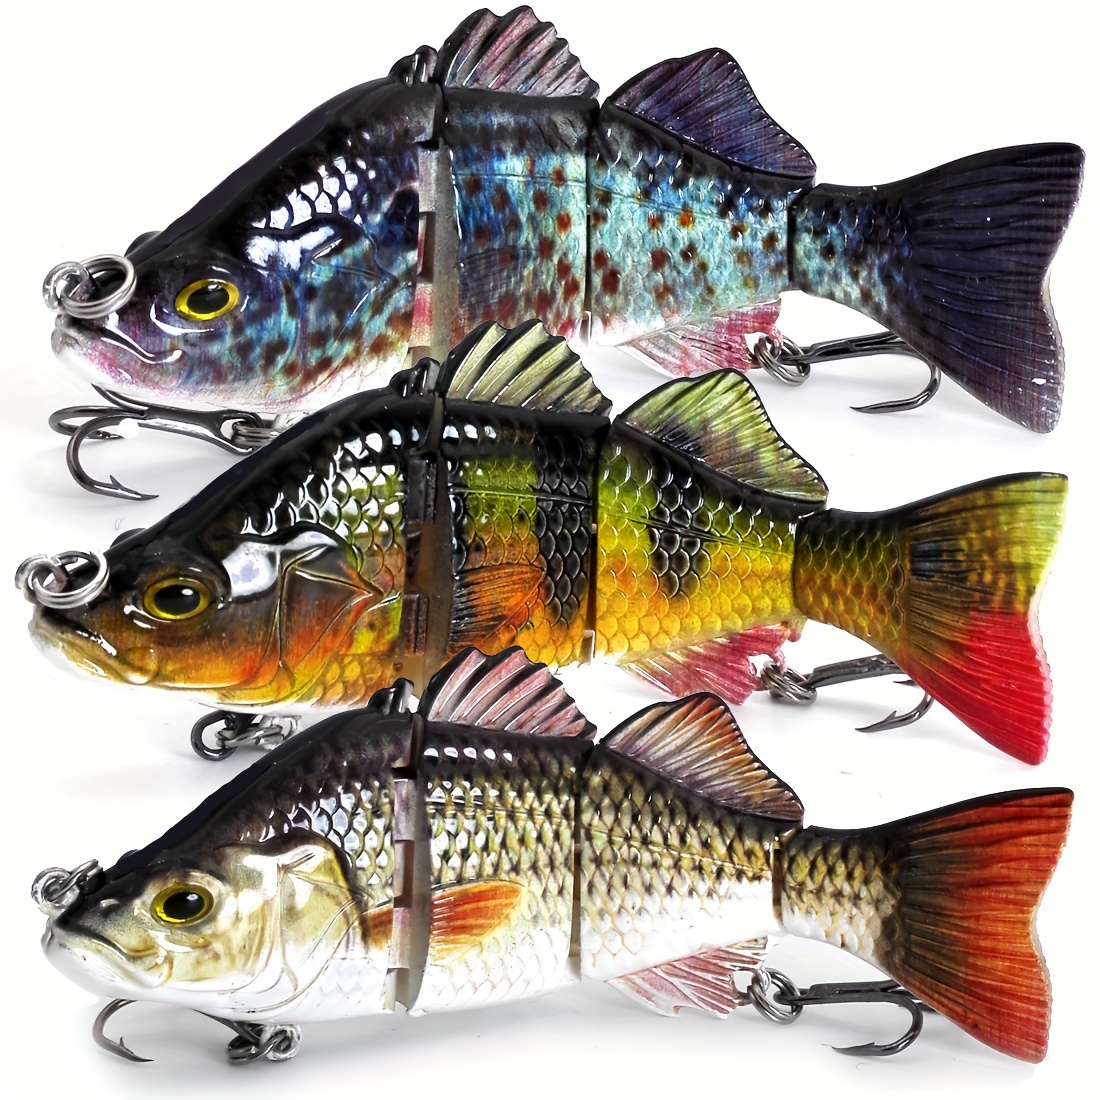 Homruilink Fishing Lures for Bass Trout Multi Jointed Swimbaits